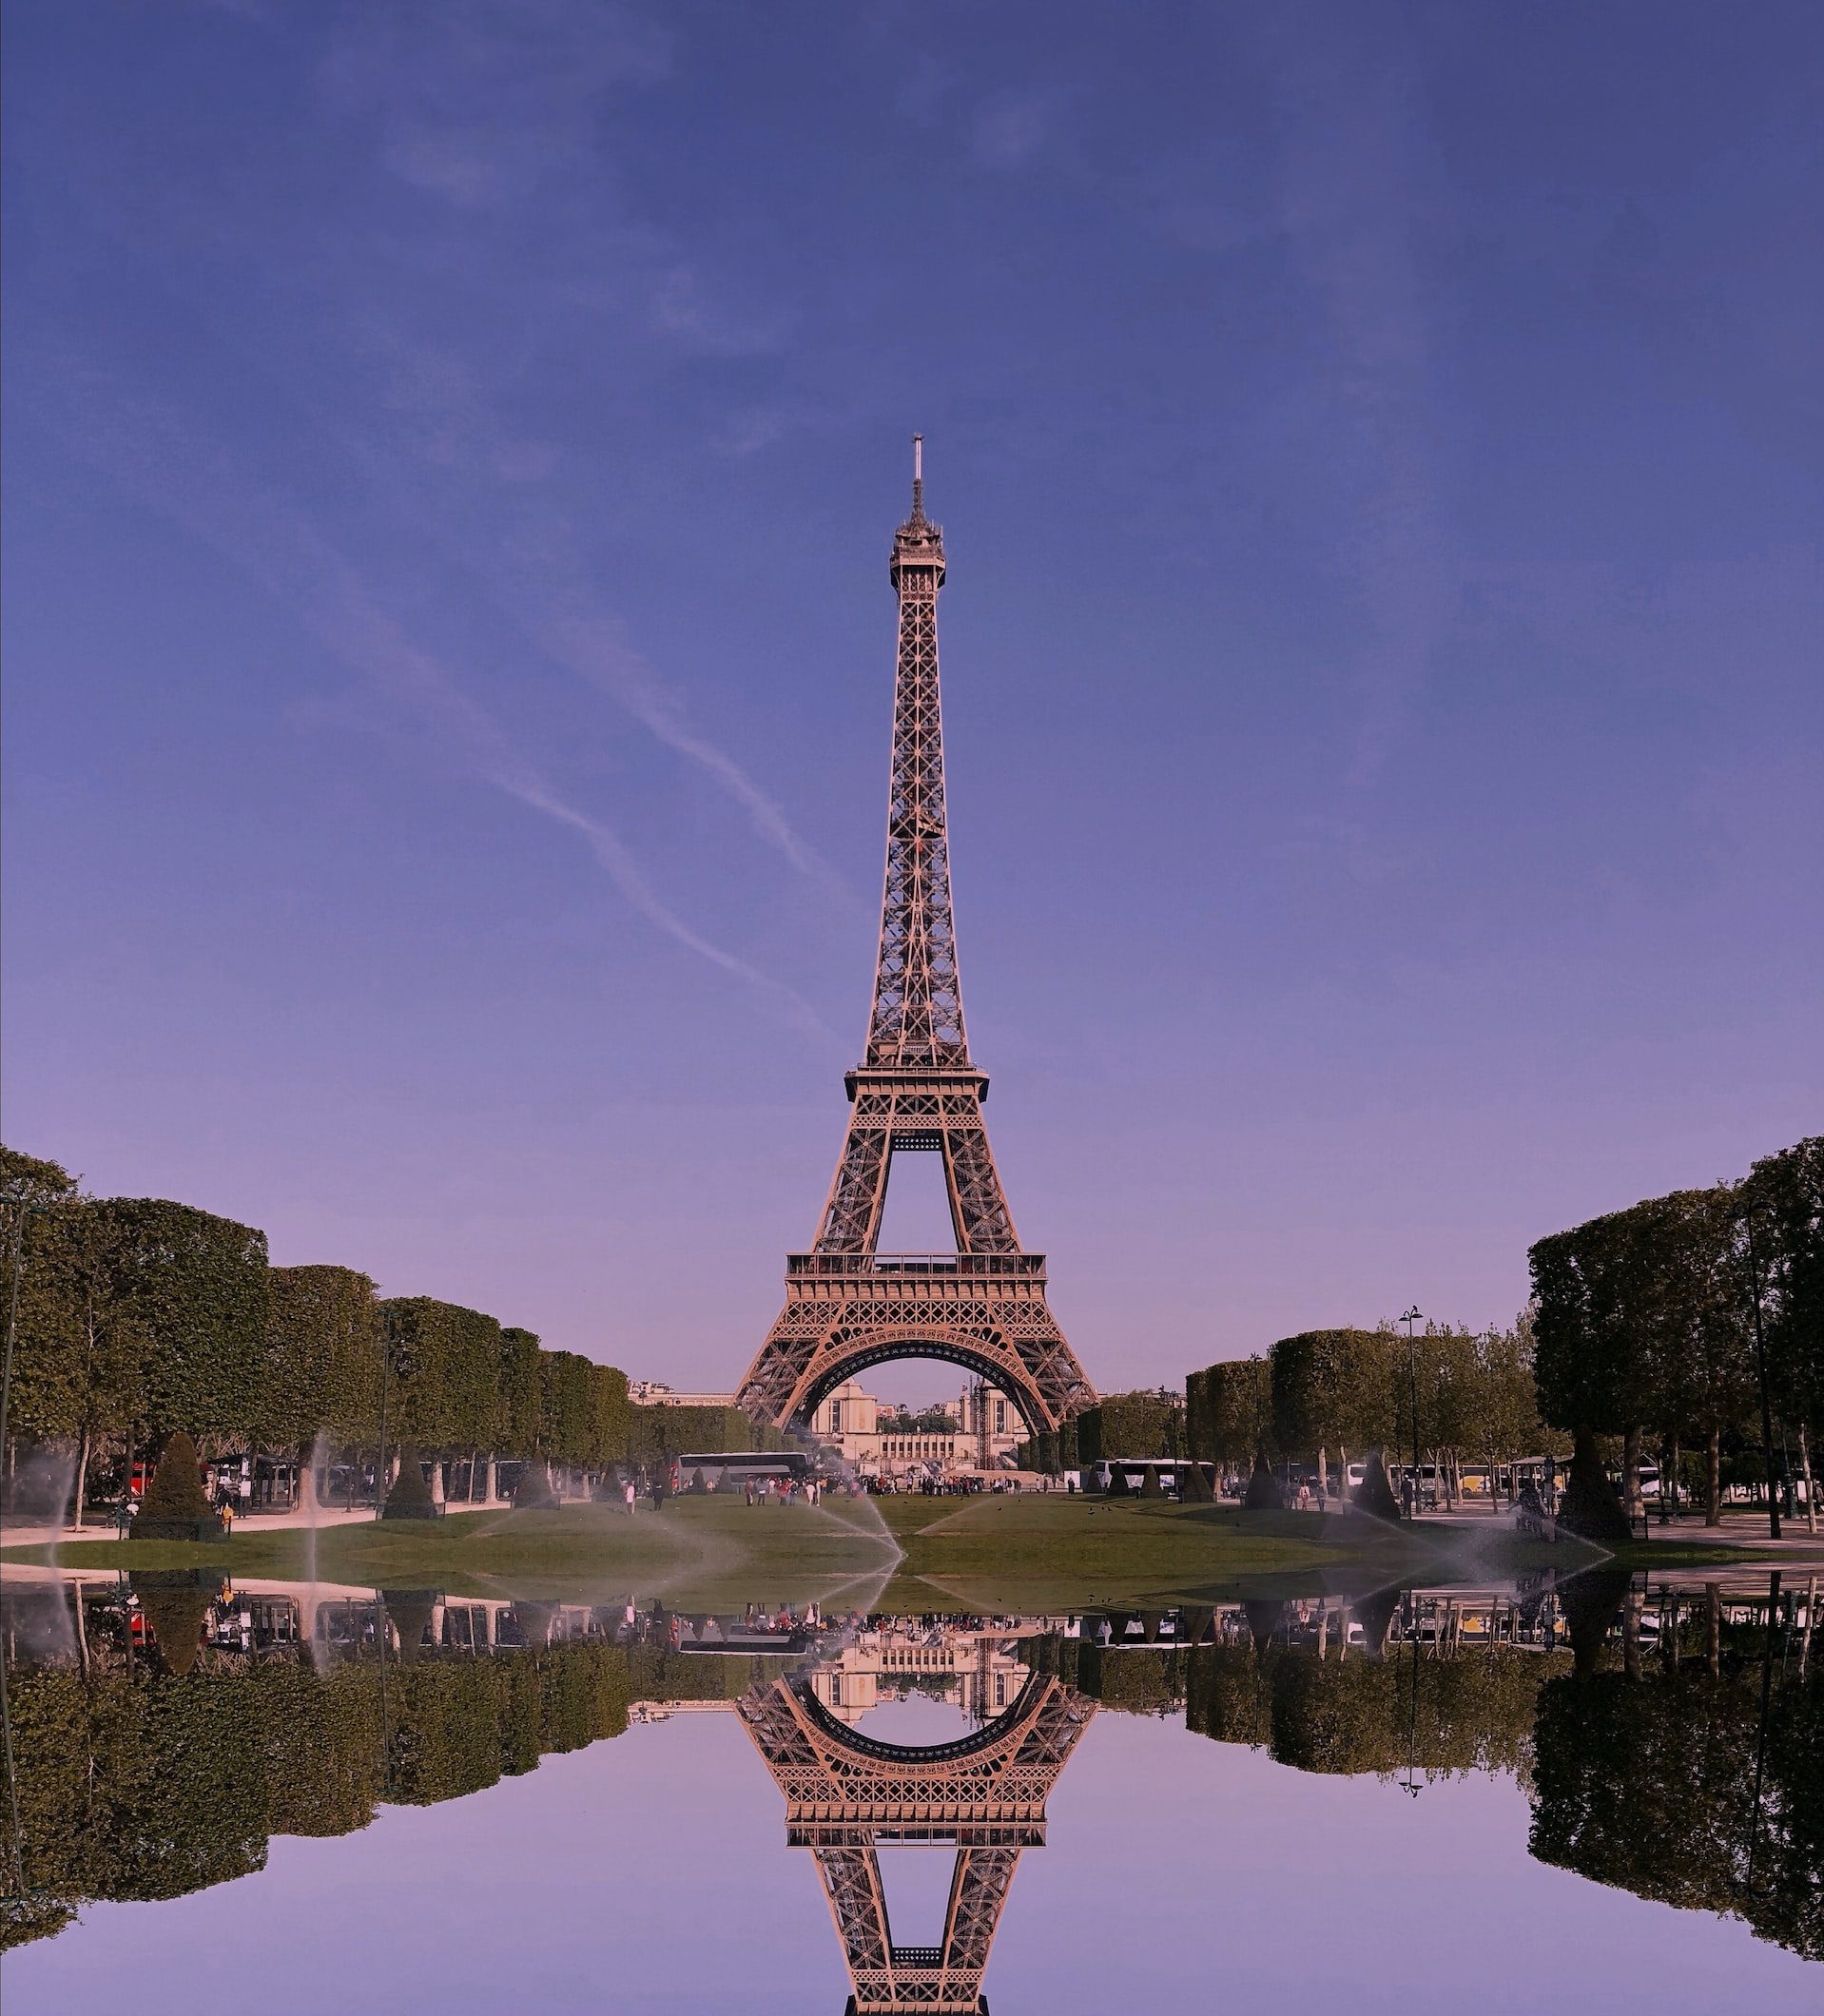 Eiffel Tower in movies as seen from a distance